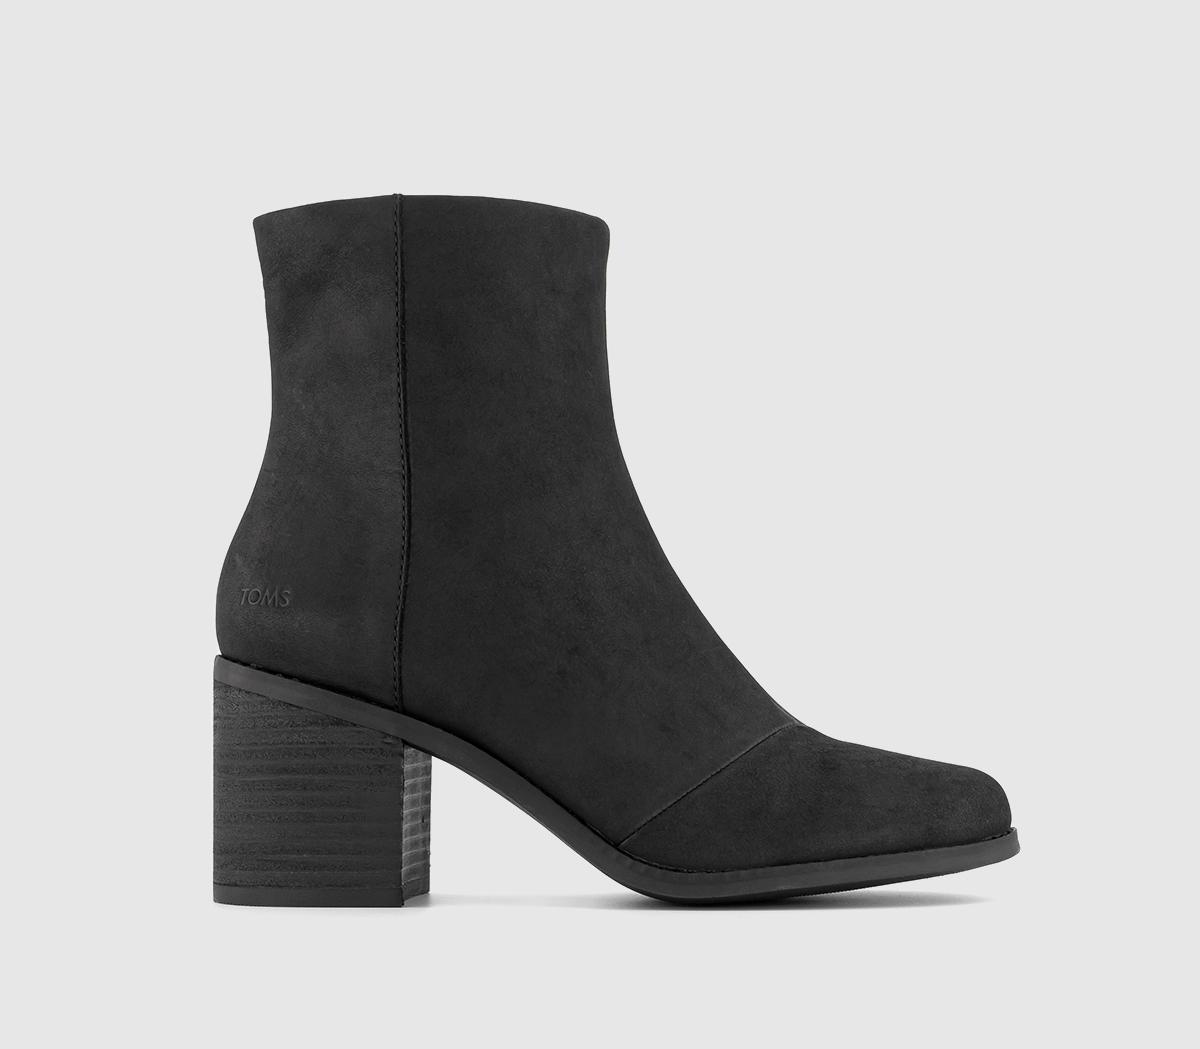 TOMS Evelyn Heeled Boots Black Leather - Women's Ankle Boots